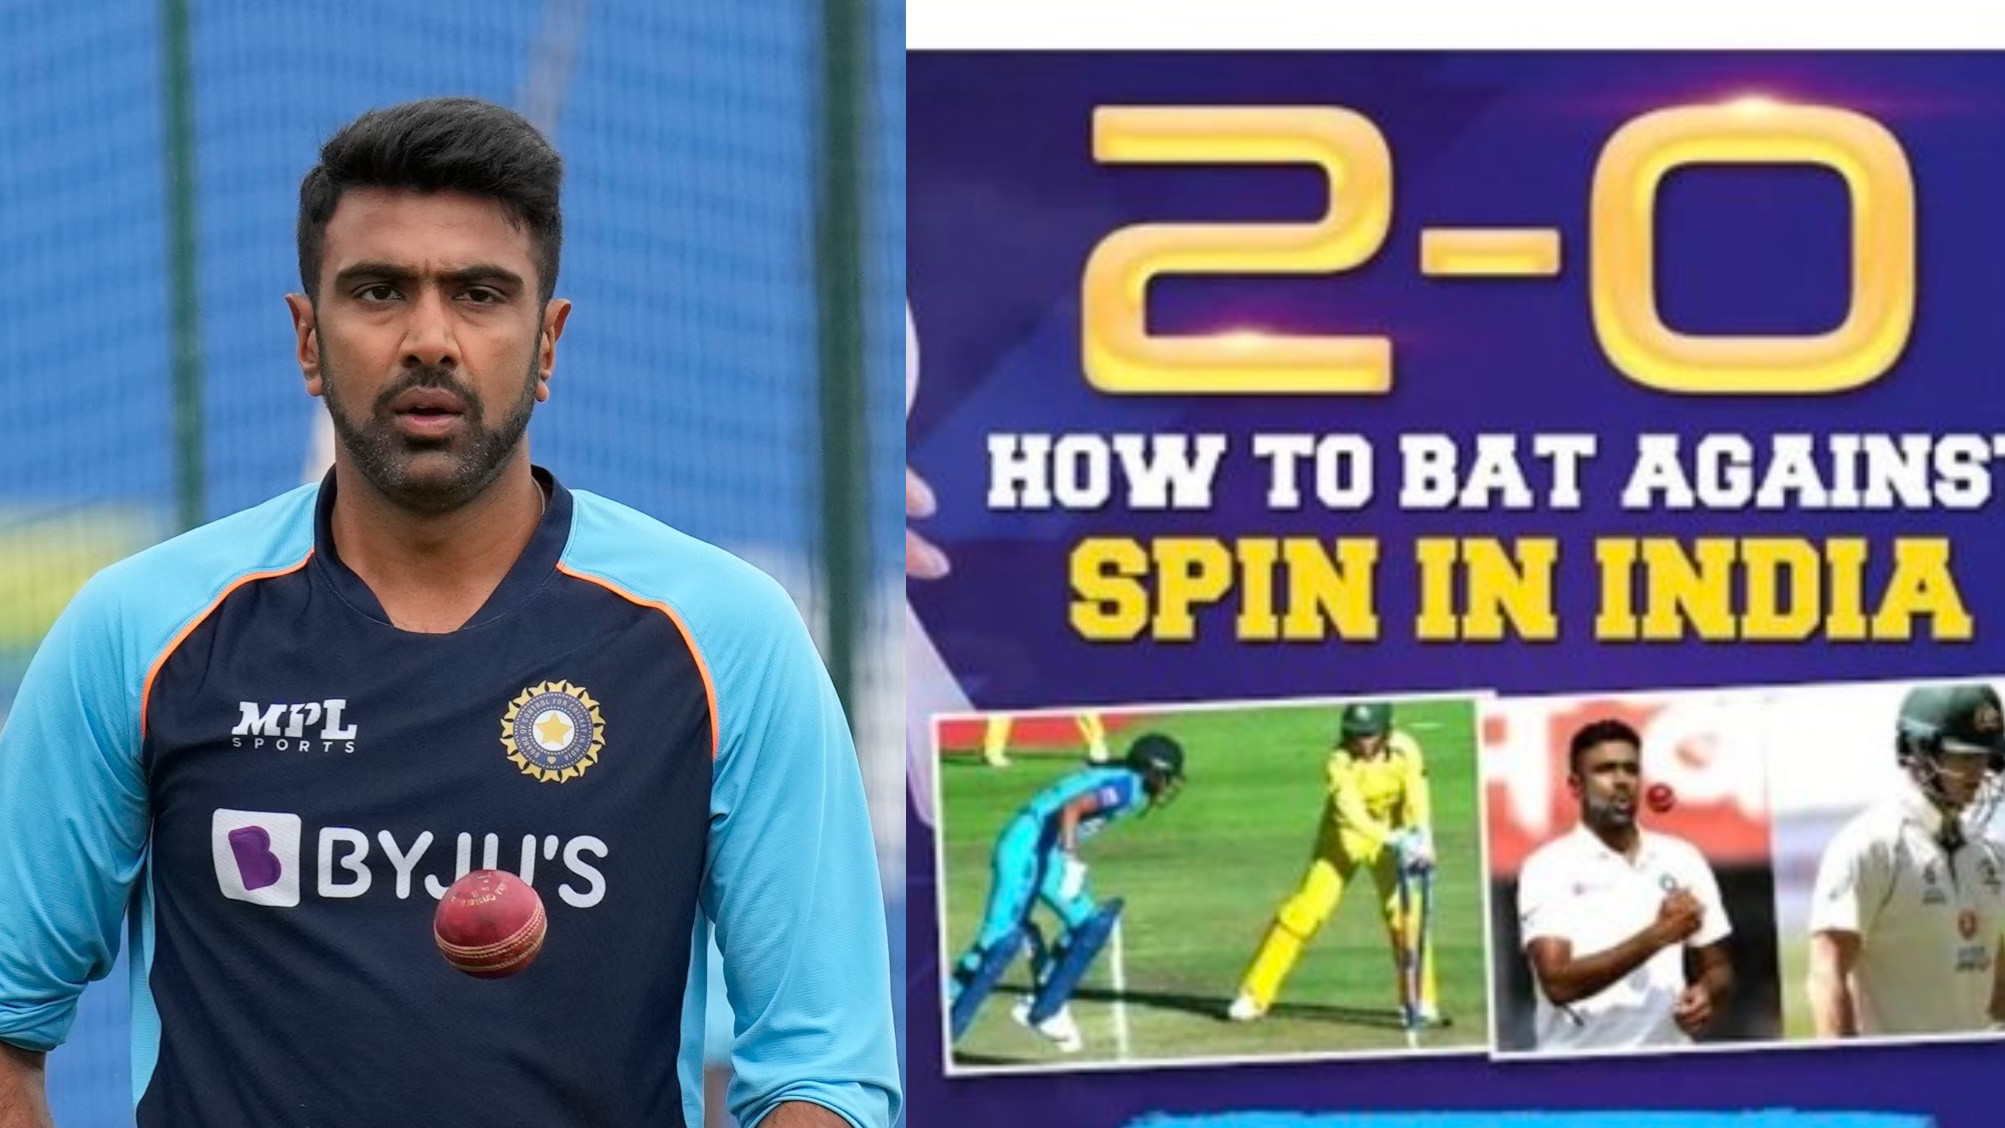 IND v AUS 2023: 'You are reason for our downfall...'- Ashwin recalls fans’ outburst towards him after loss in Indore Test